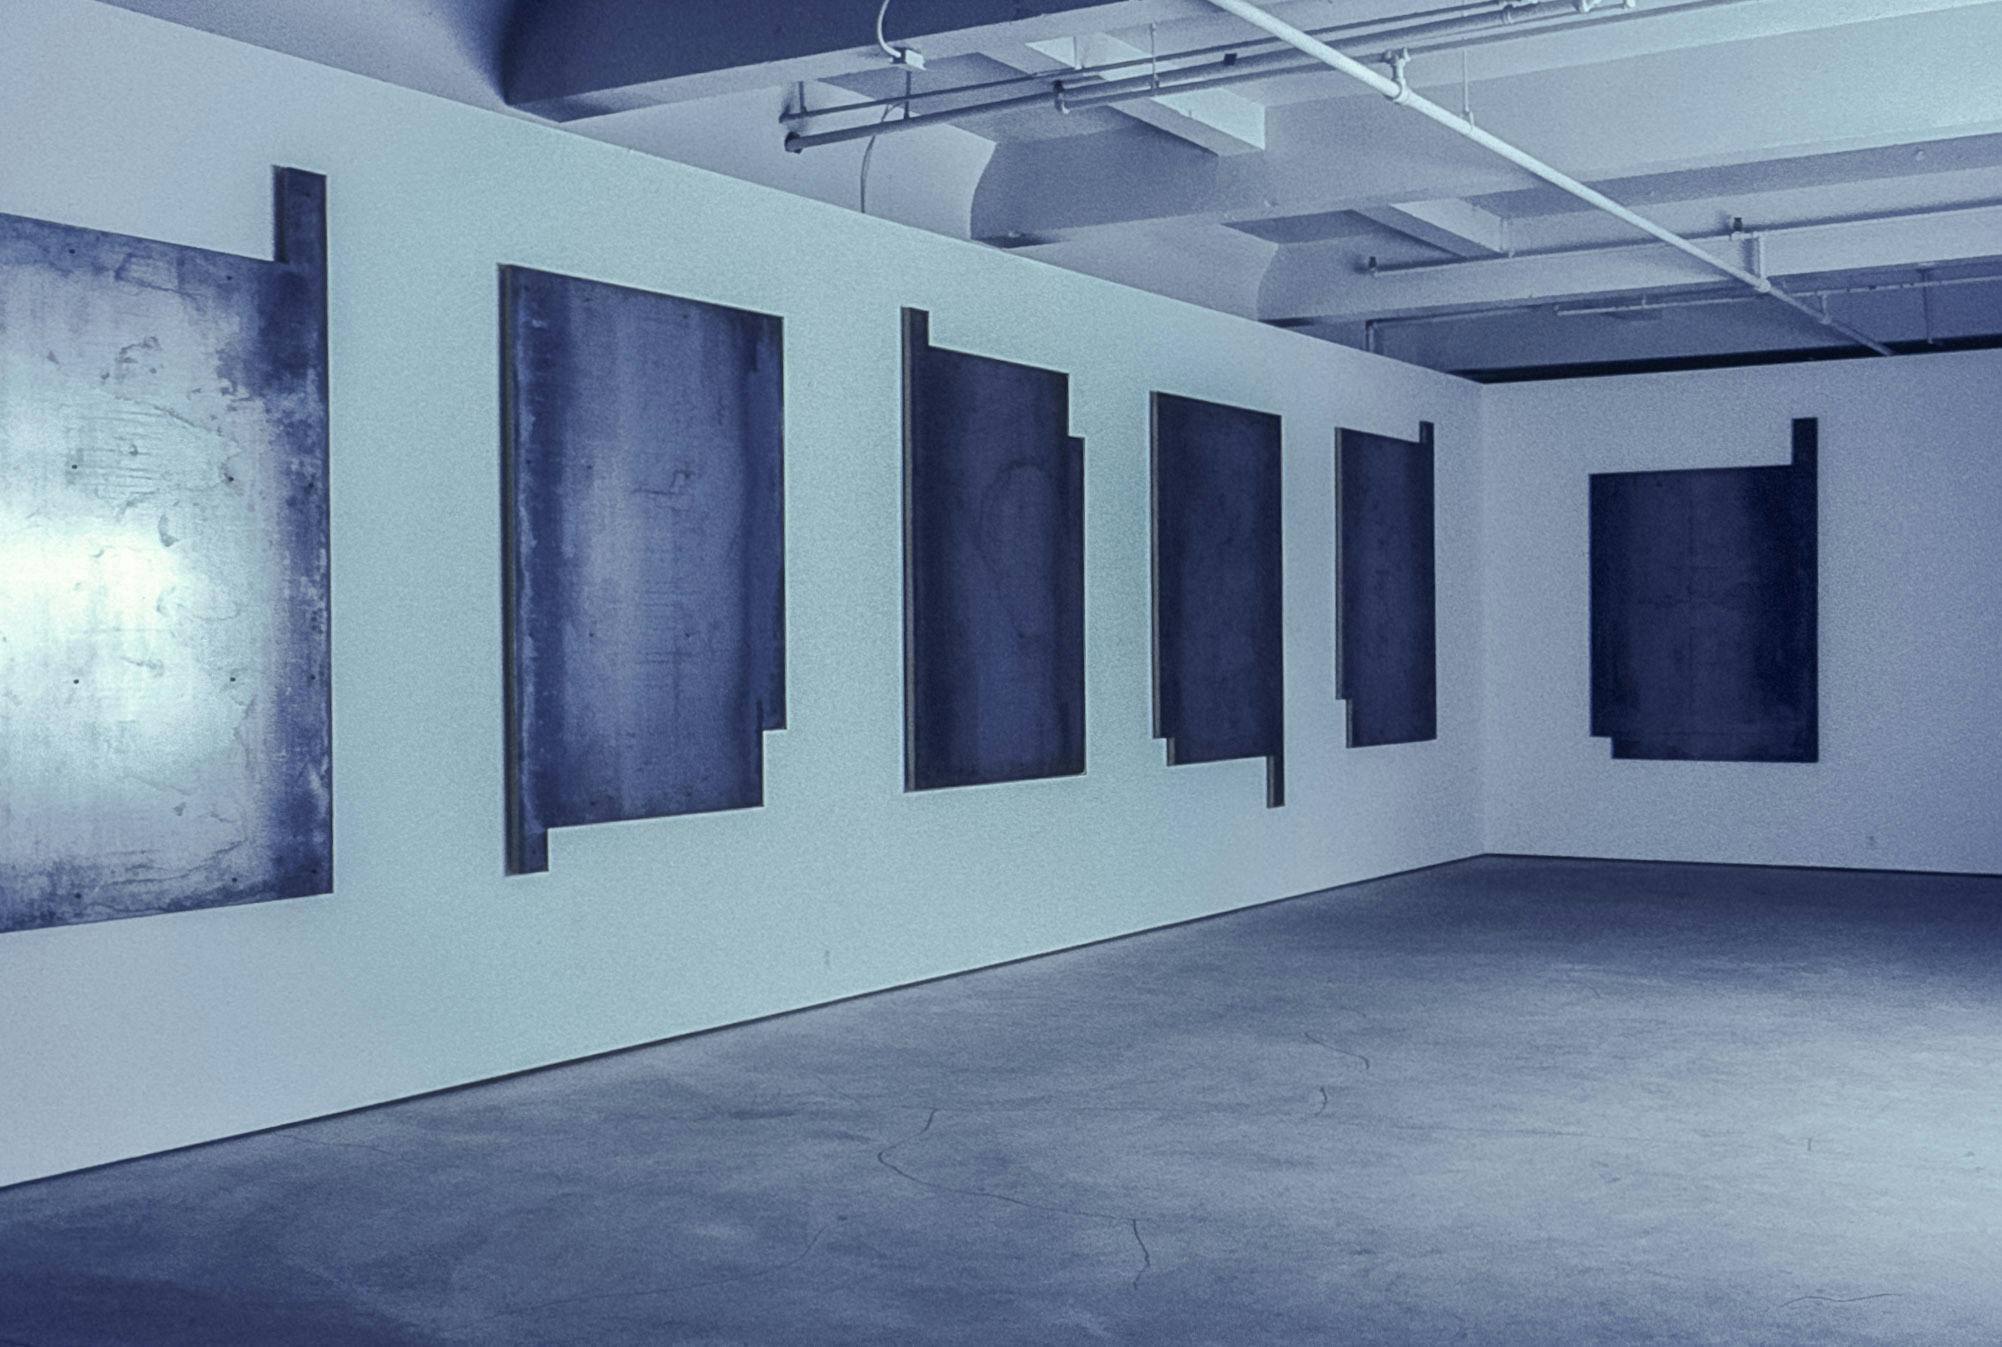 In the corner of a gallery, several rectangular metal panels hang on the wall. They have small rectangular pieces missing and protruding from their corners. Their surfaces are scuffed and marked.